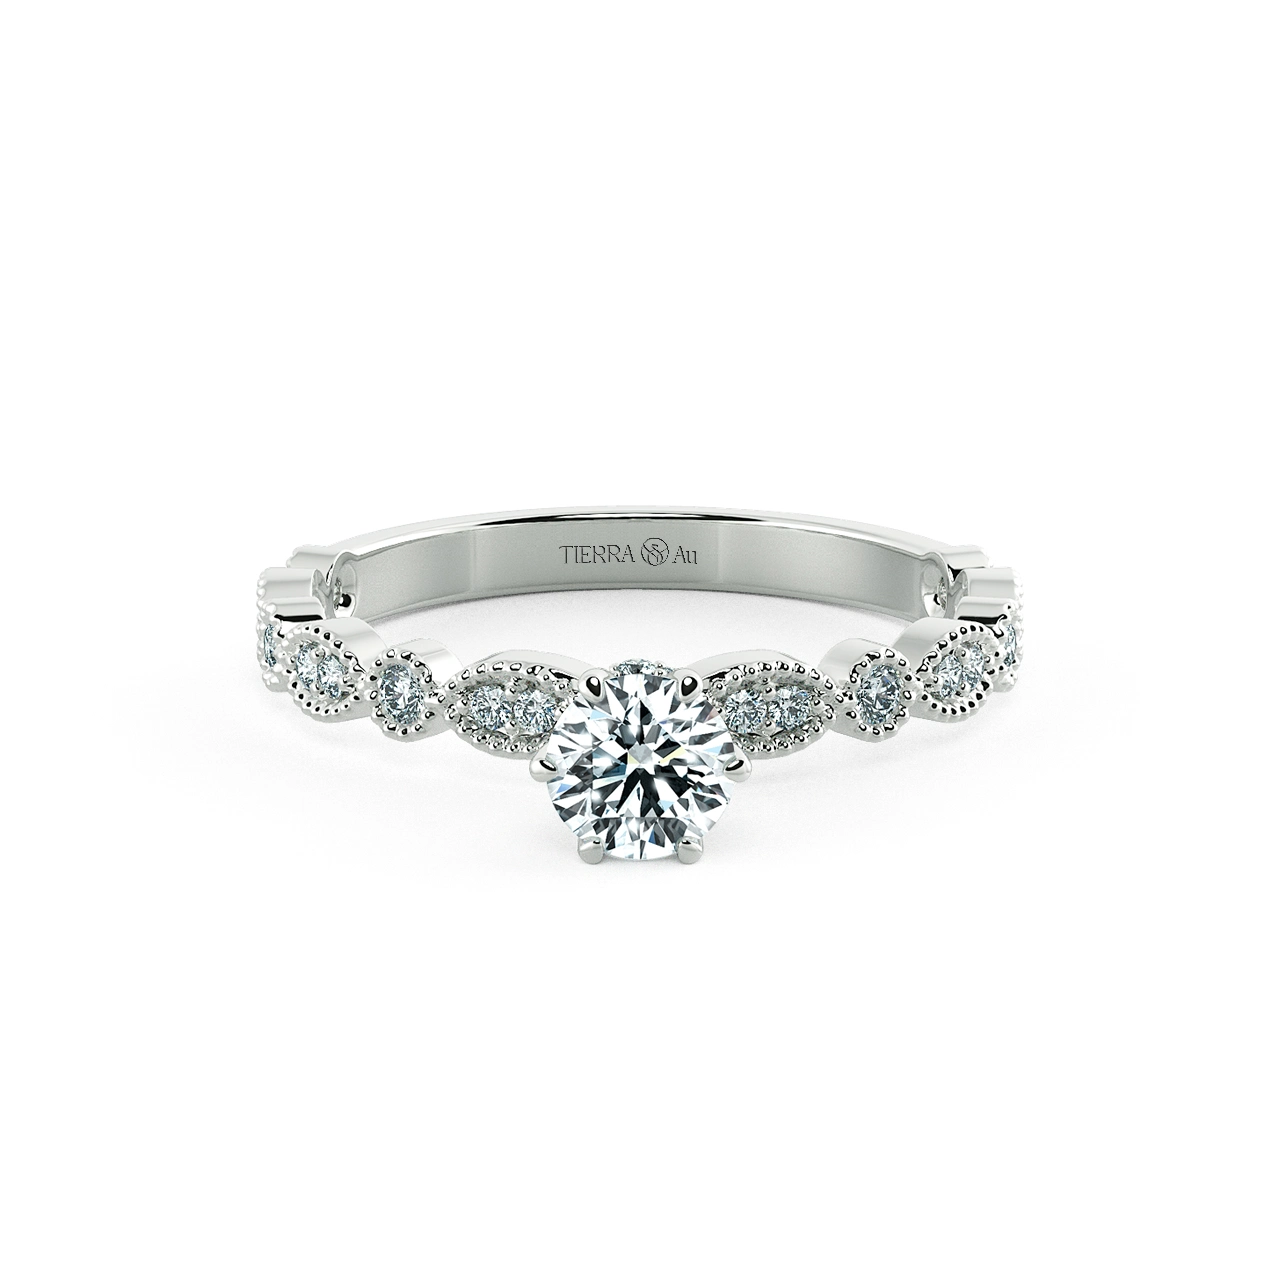 Solitaire Engagement Ring with Eternity Band NCH1802